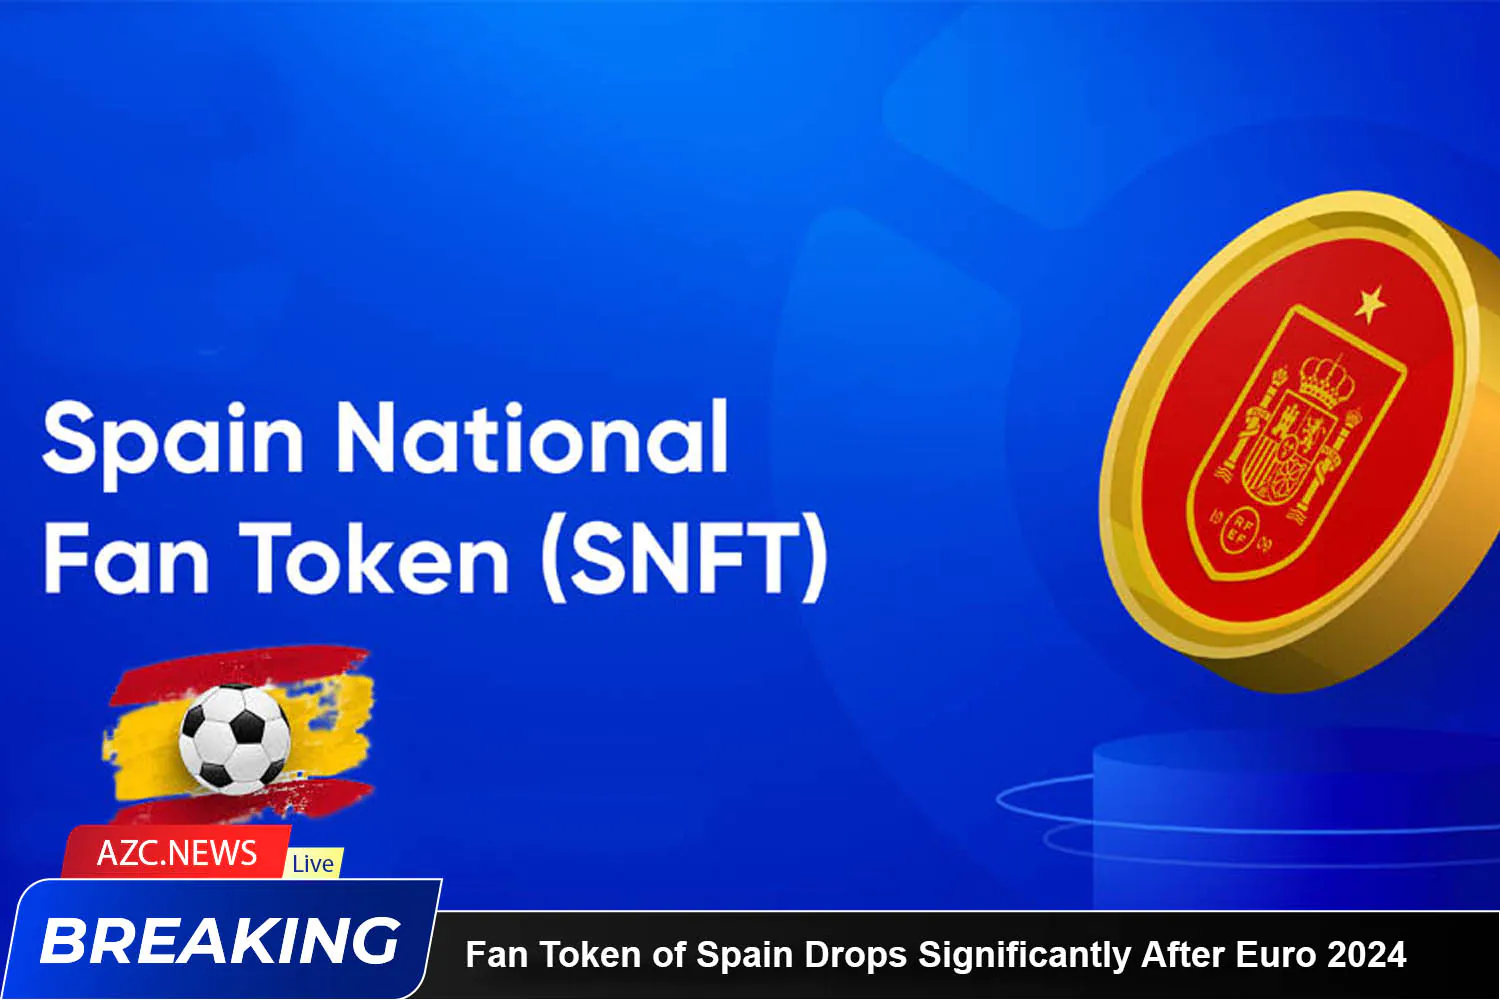 Snft Fan Token Of Spain Drops Significantly After Euro 2024